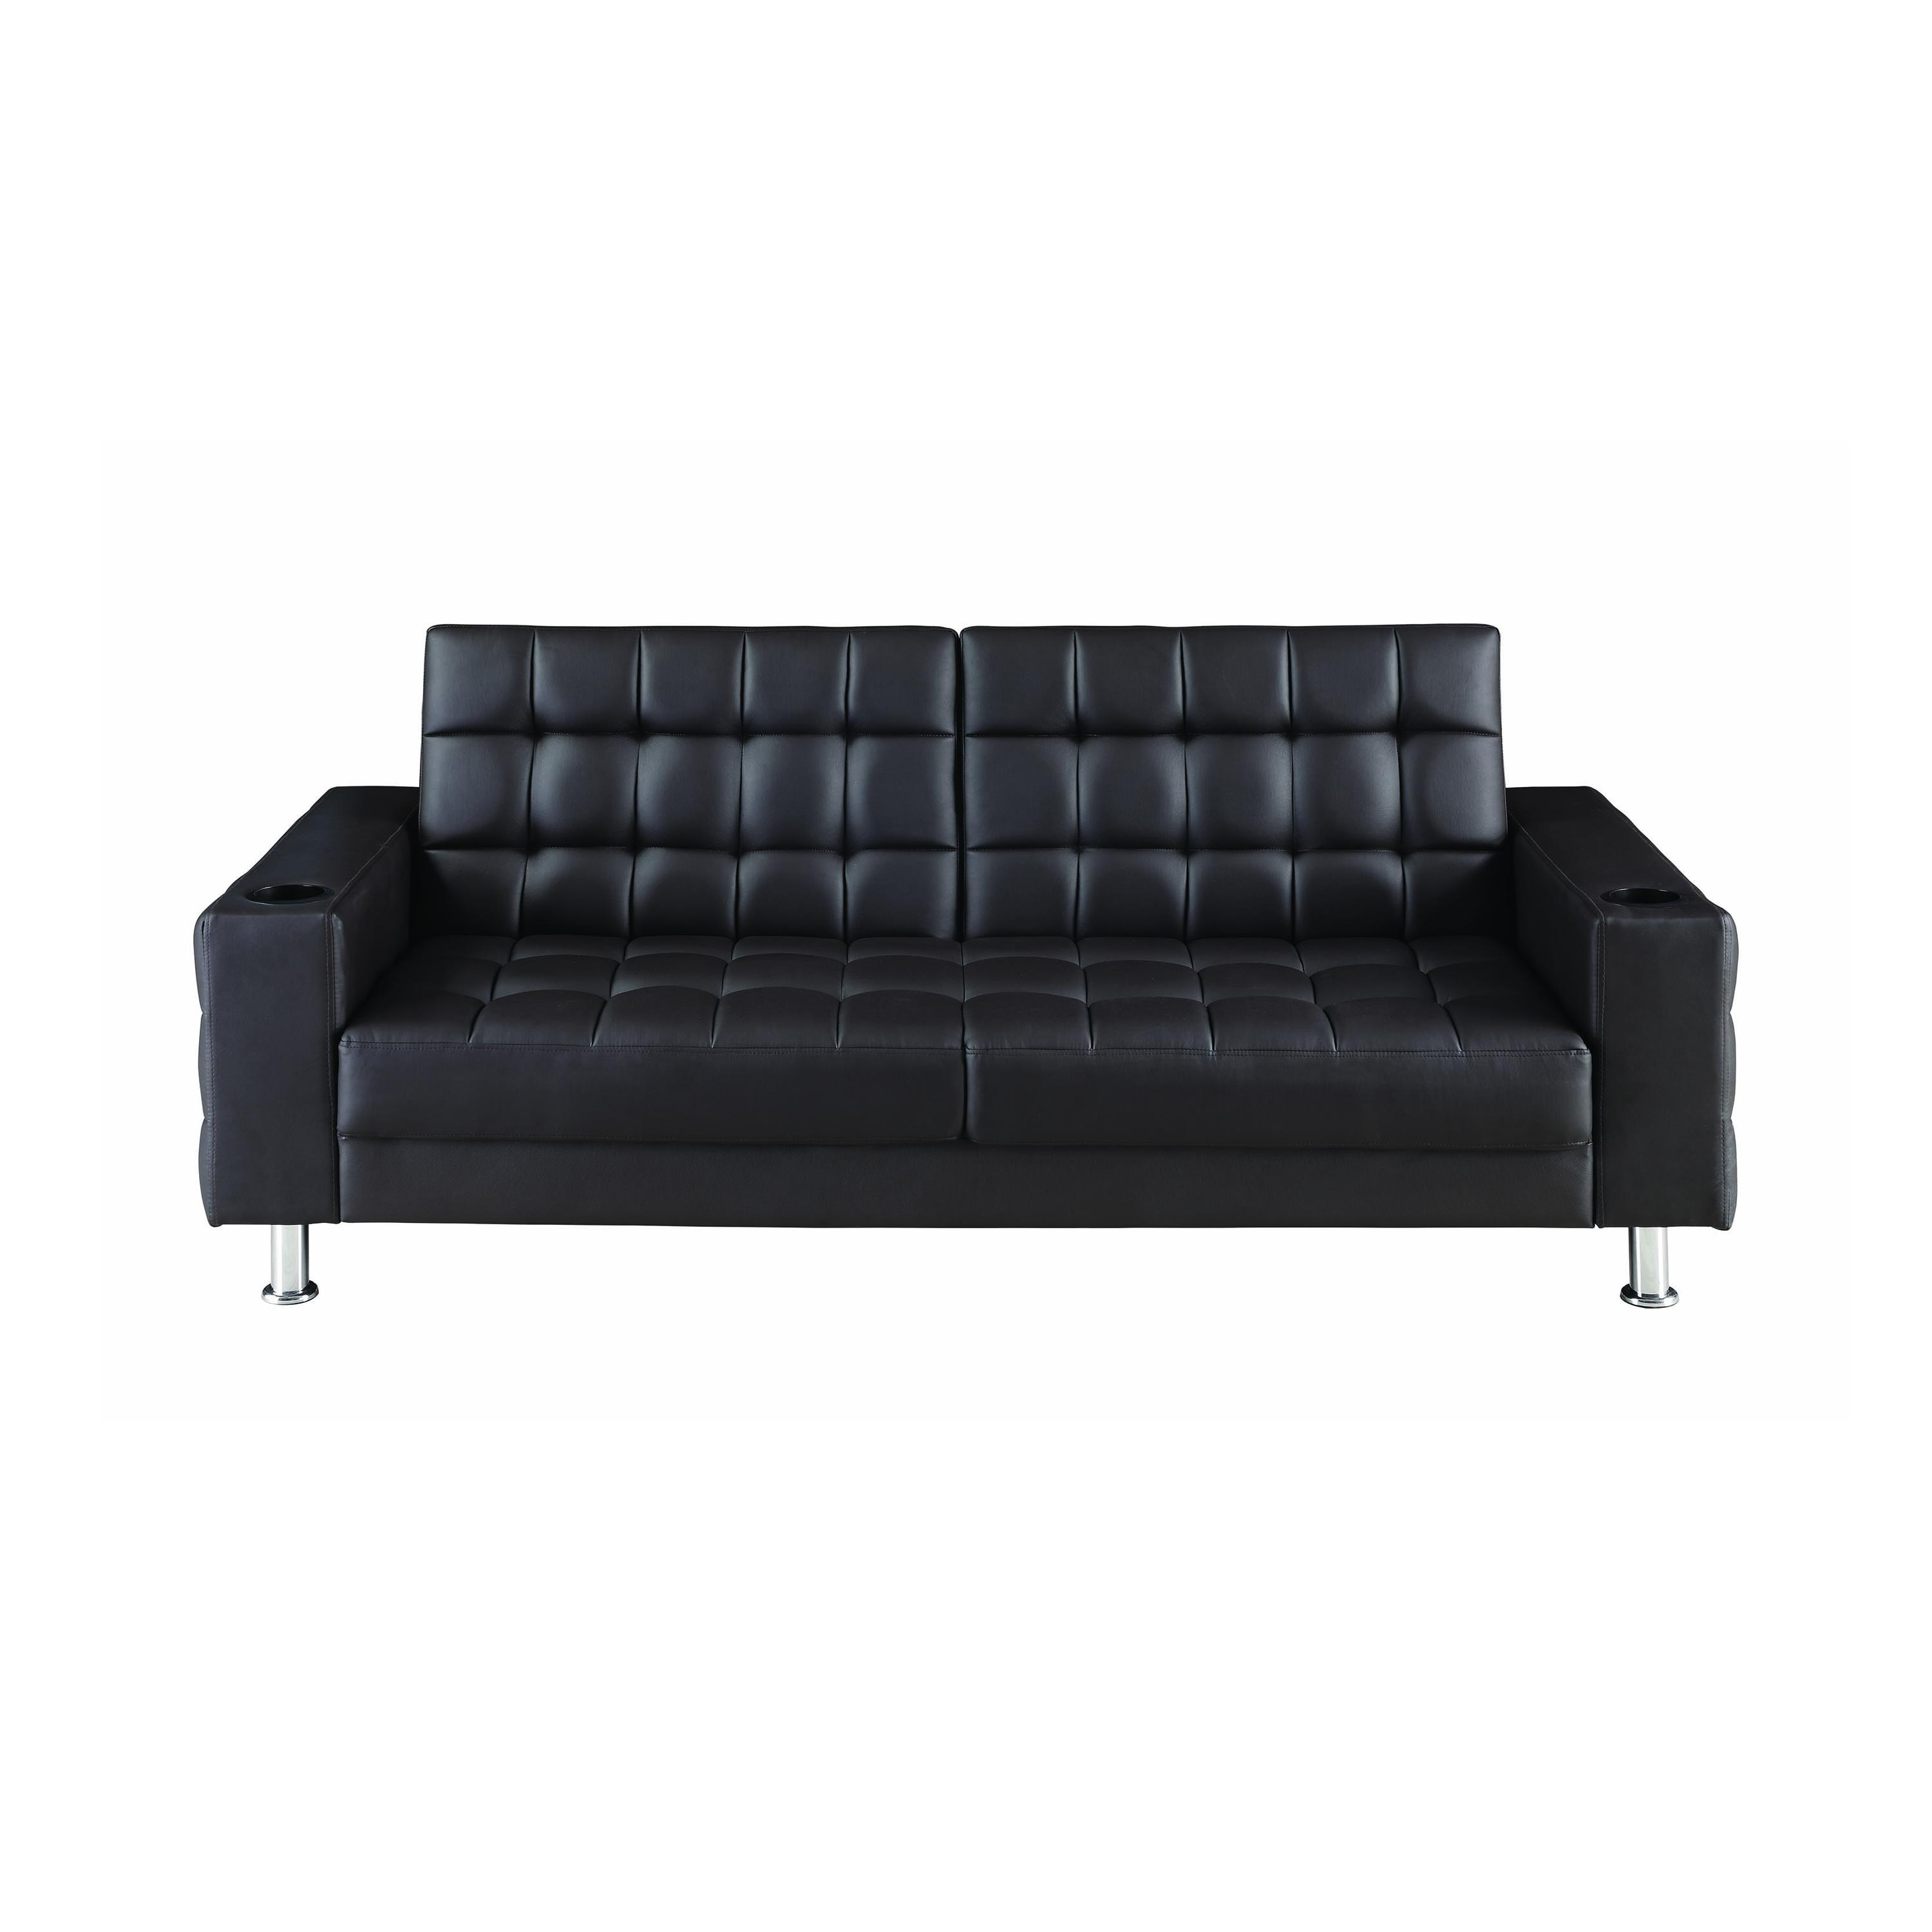 Contemporary Sofa bed 300294 Pacheco 300294 in Dark Brown Leatherette